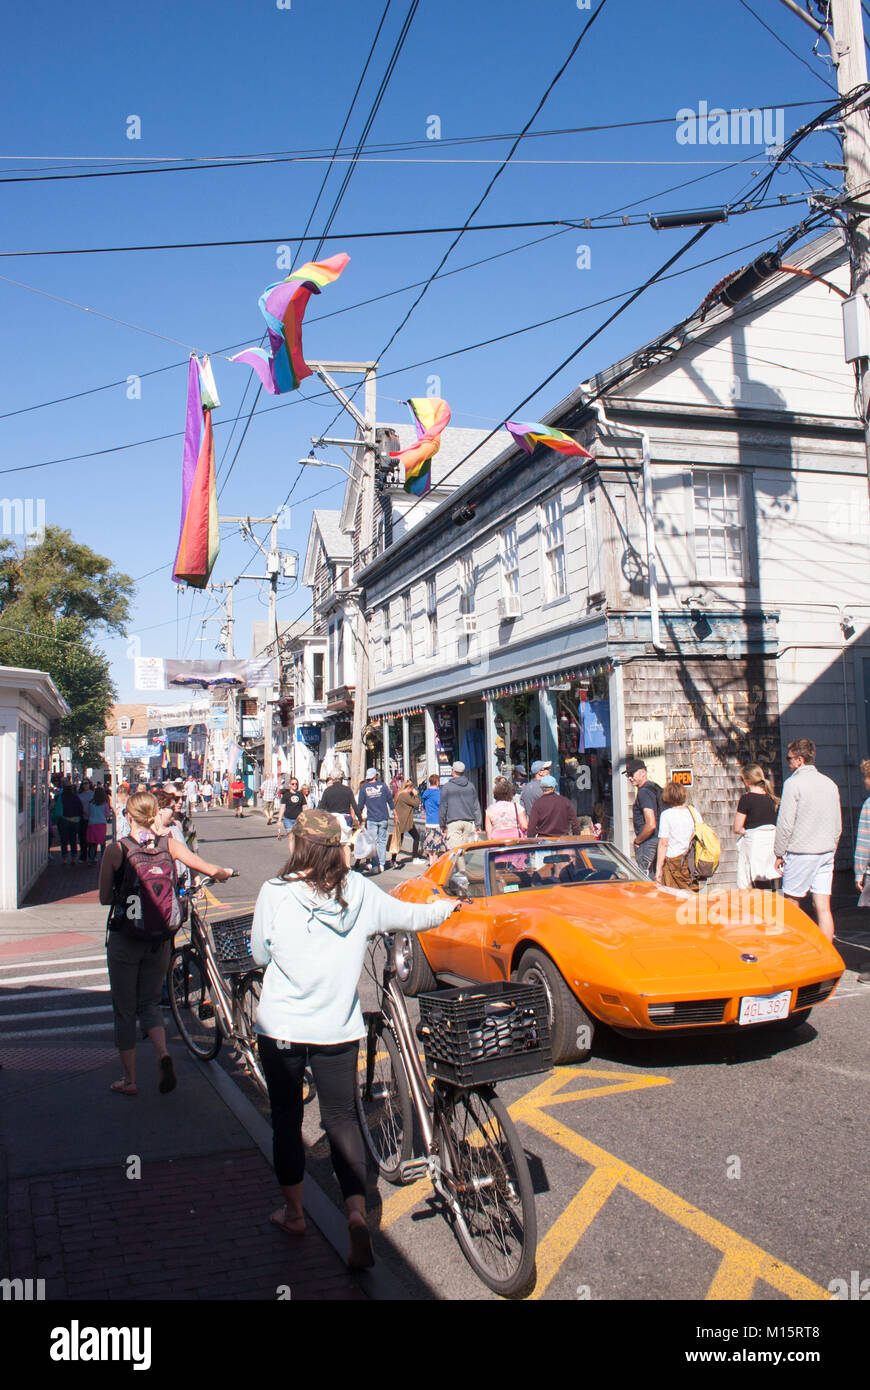 Pedestrians and a Classic Corvette on Commercial Street in Provincetown, Cape Cod, Massachusetts Stock Photo